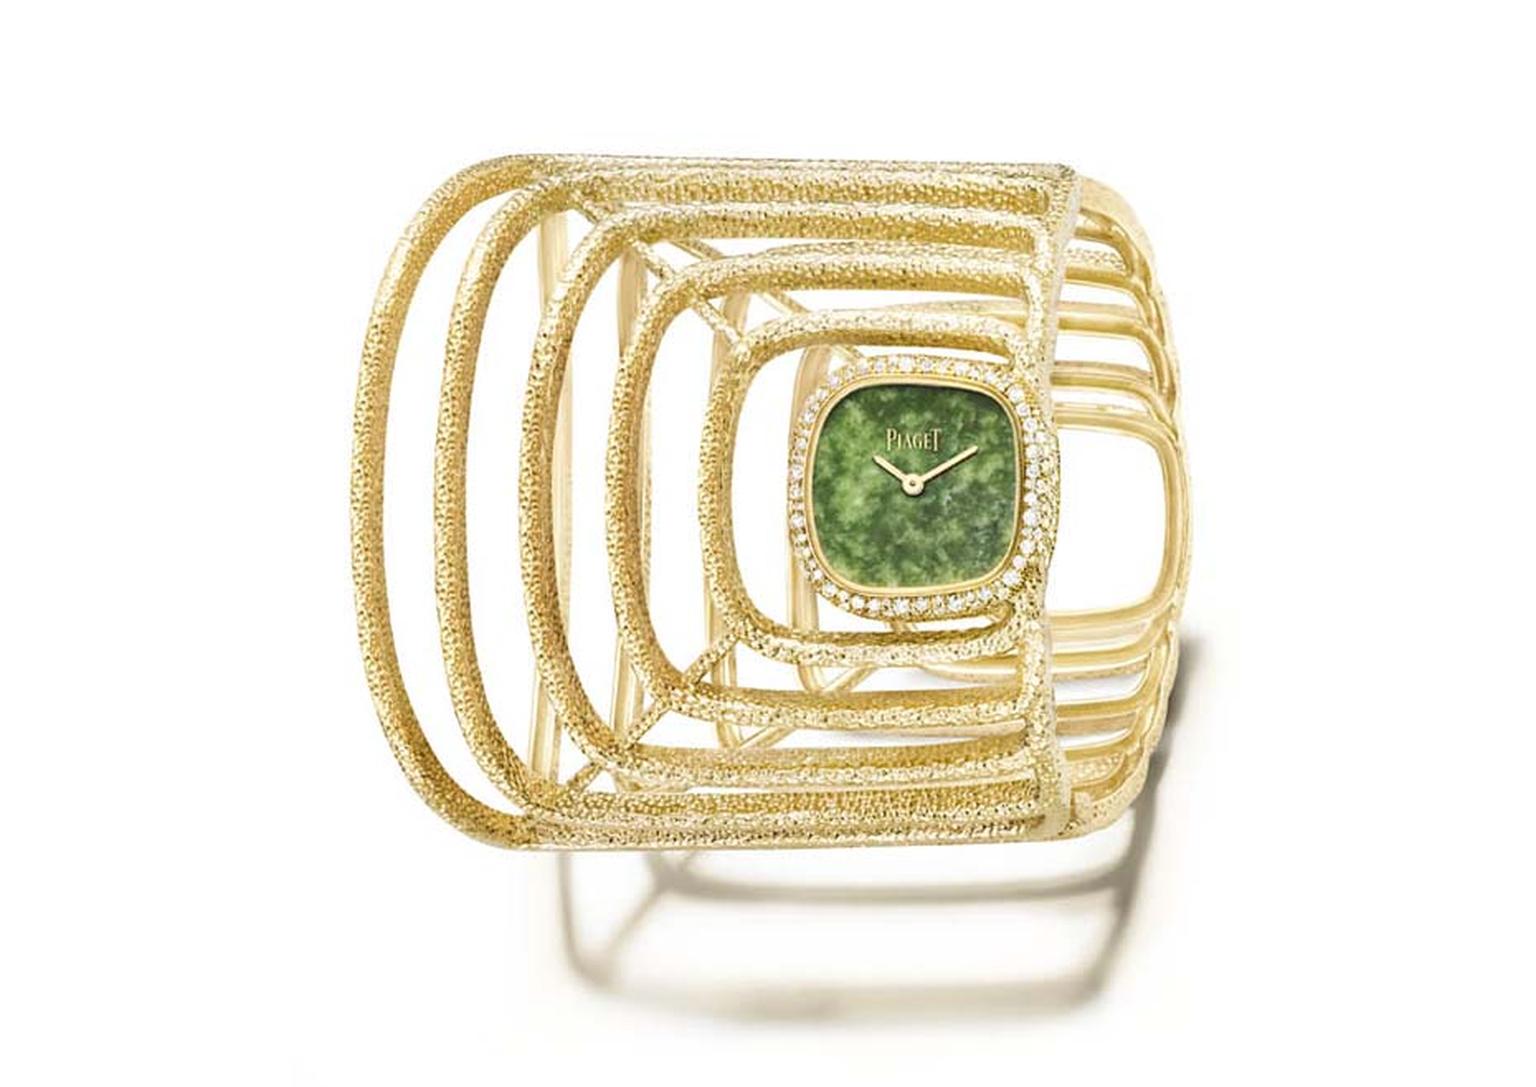 Piaget Extremely Piaget collection cuff watch featuring an off-centred natural jade dial caught in a hammered yellow gold cobweb set with 236 pave diamonds.